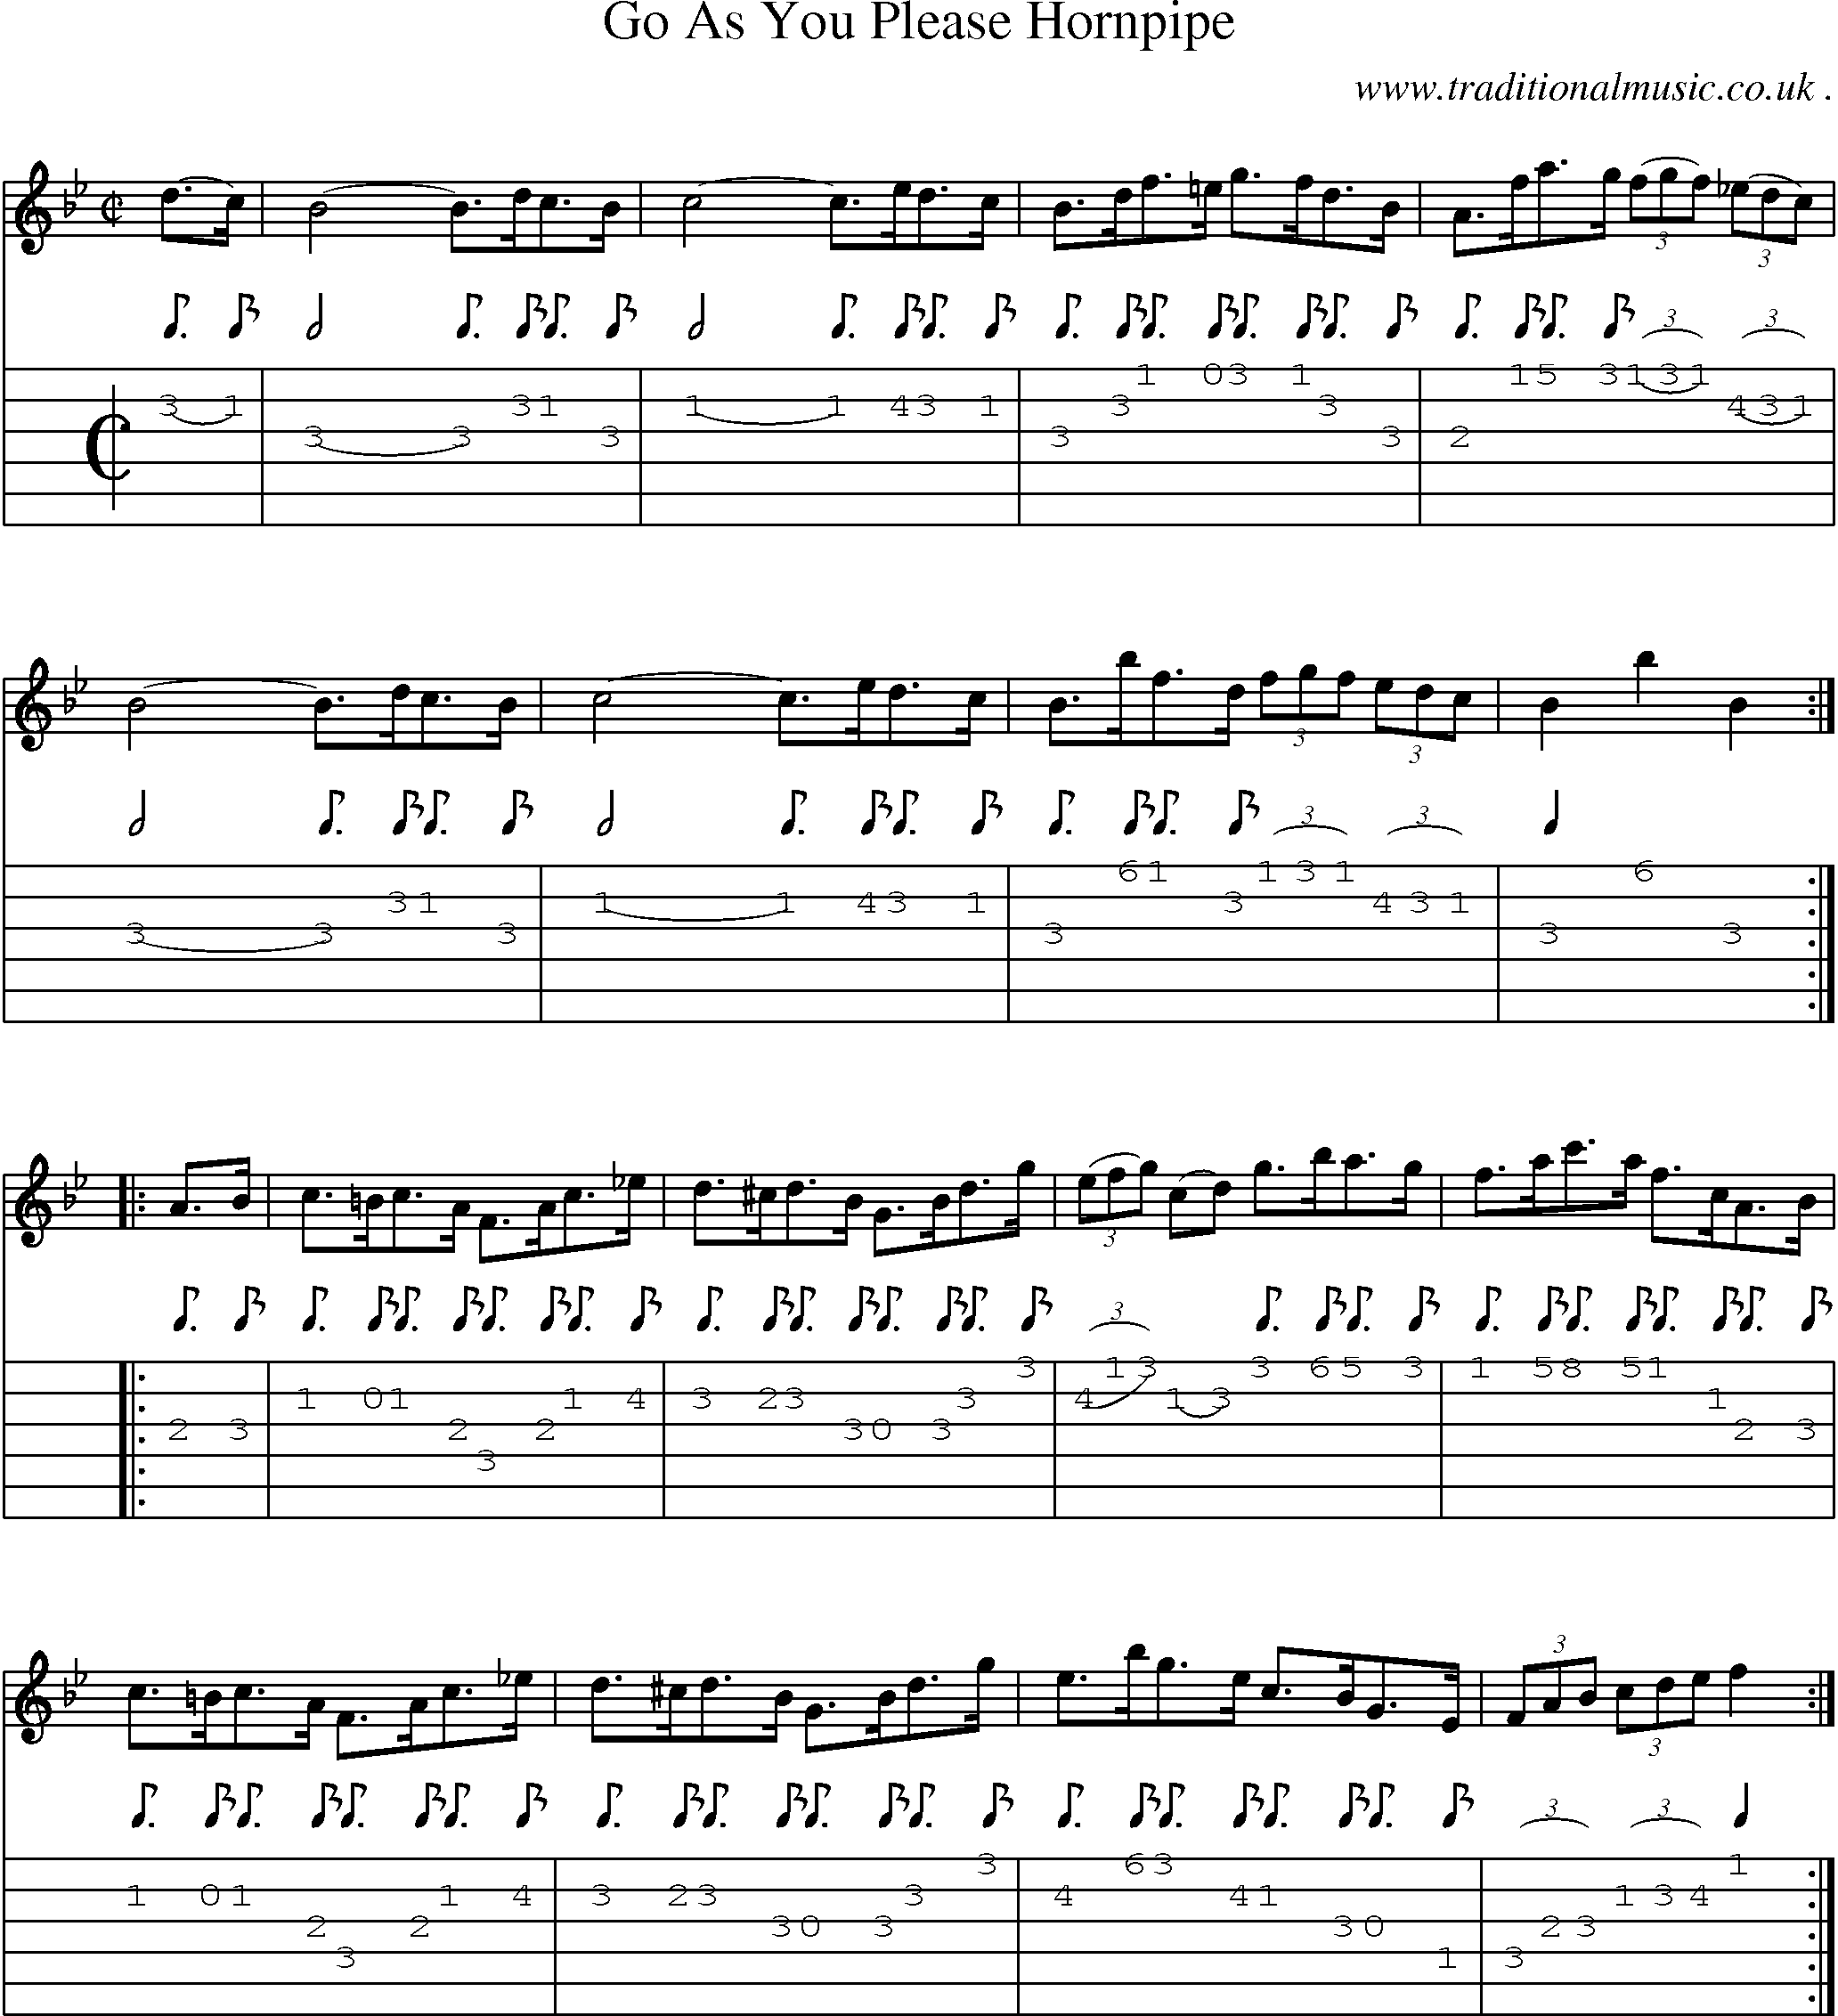 Sheet-Music and Guitar Tabs for Go As You Please Hornpipe